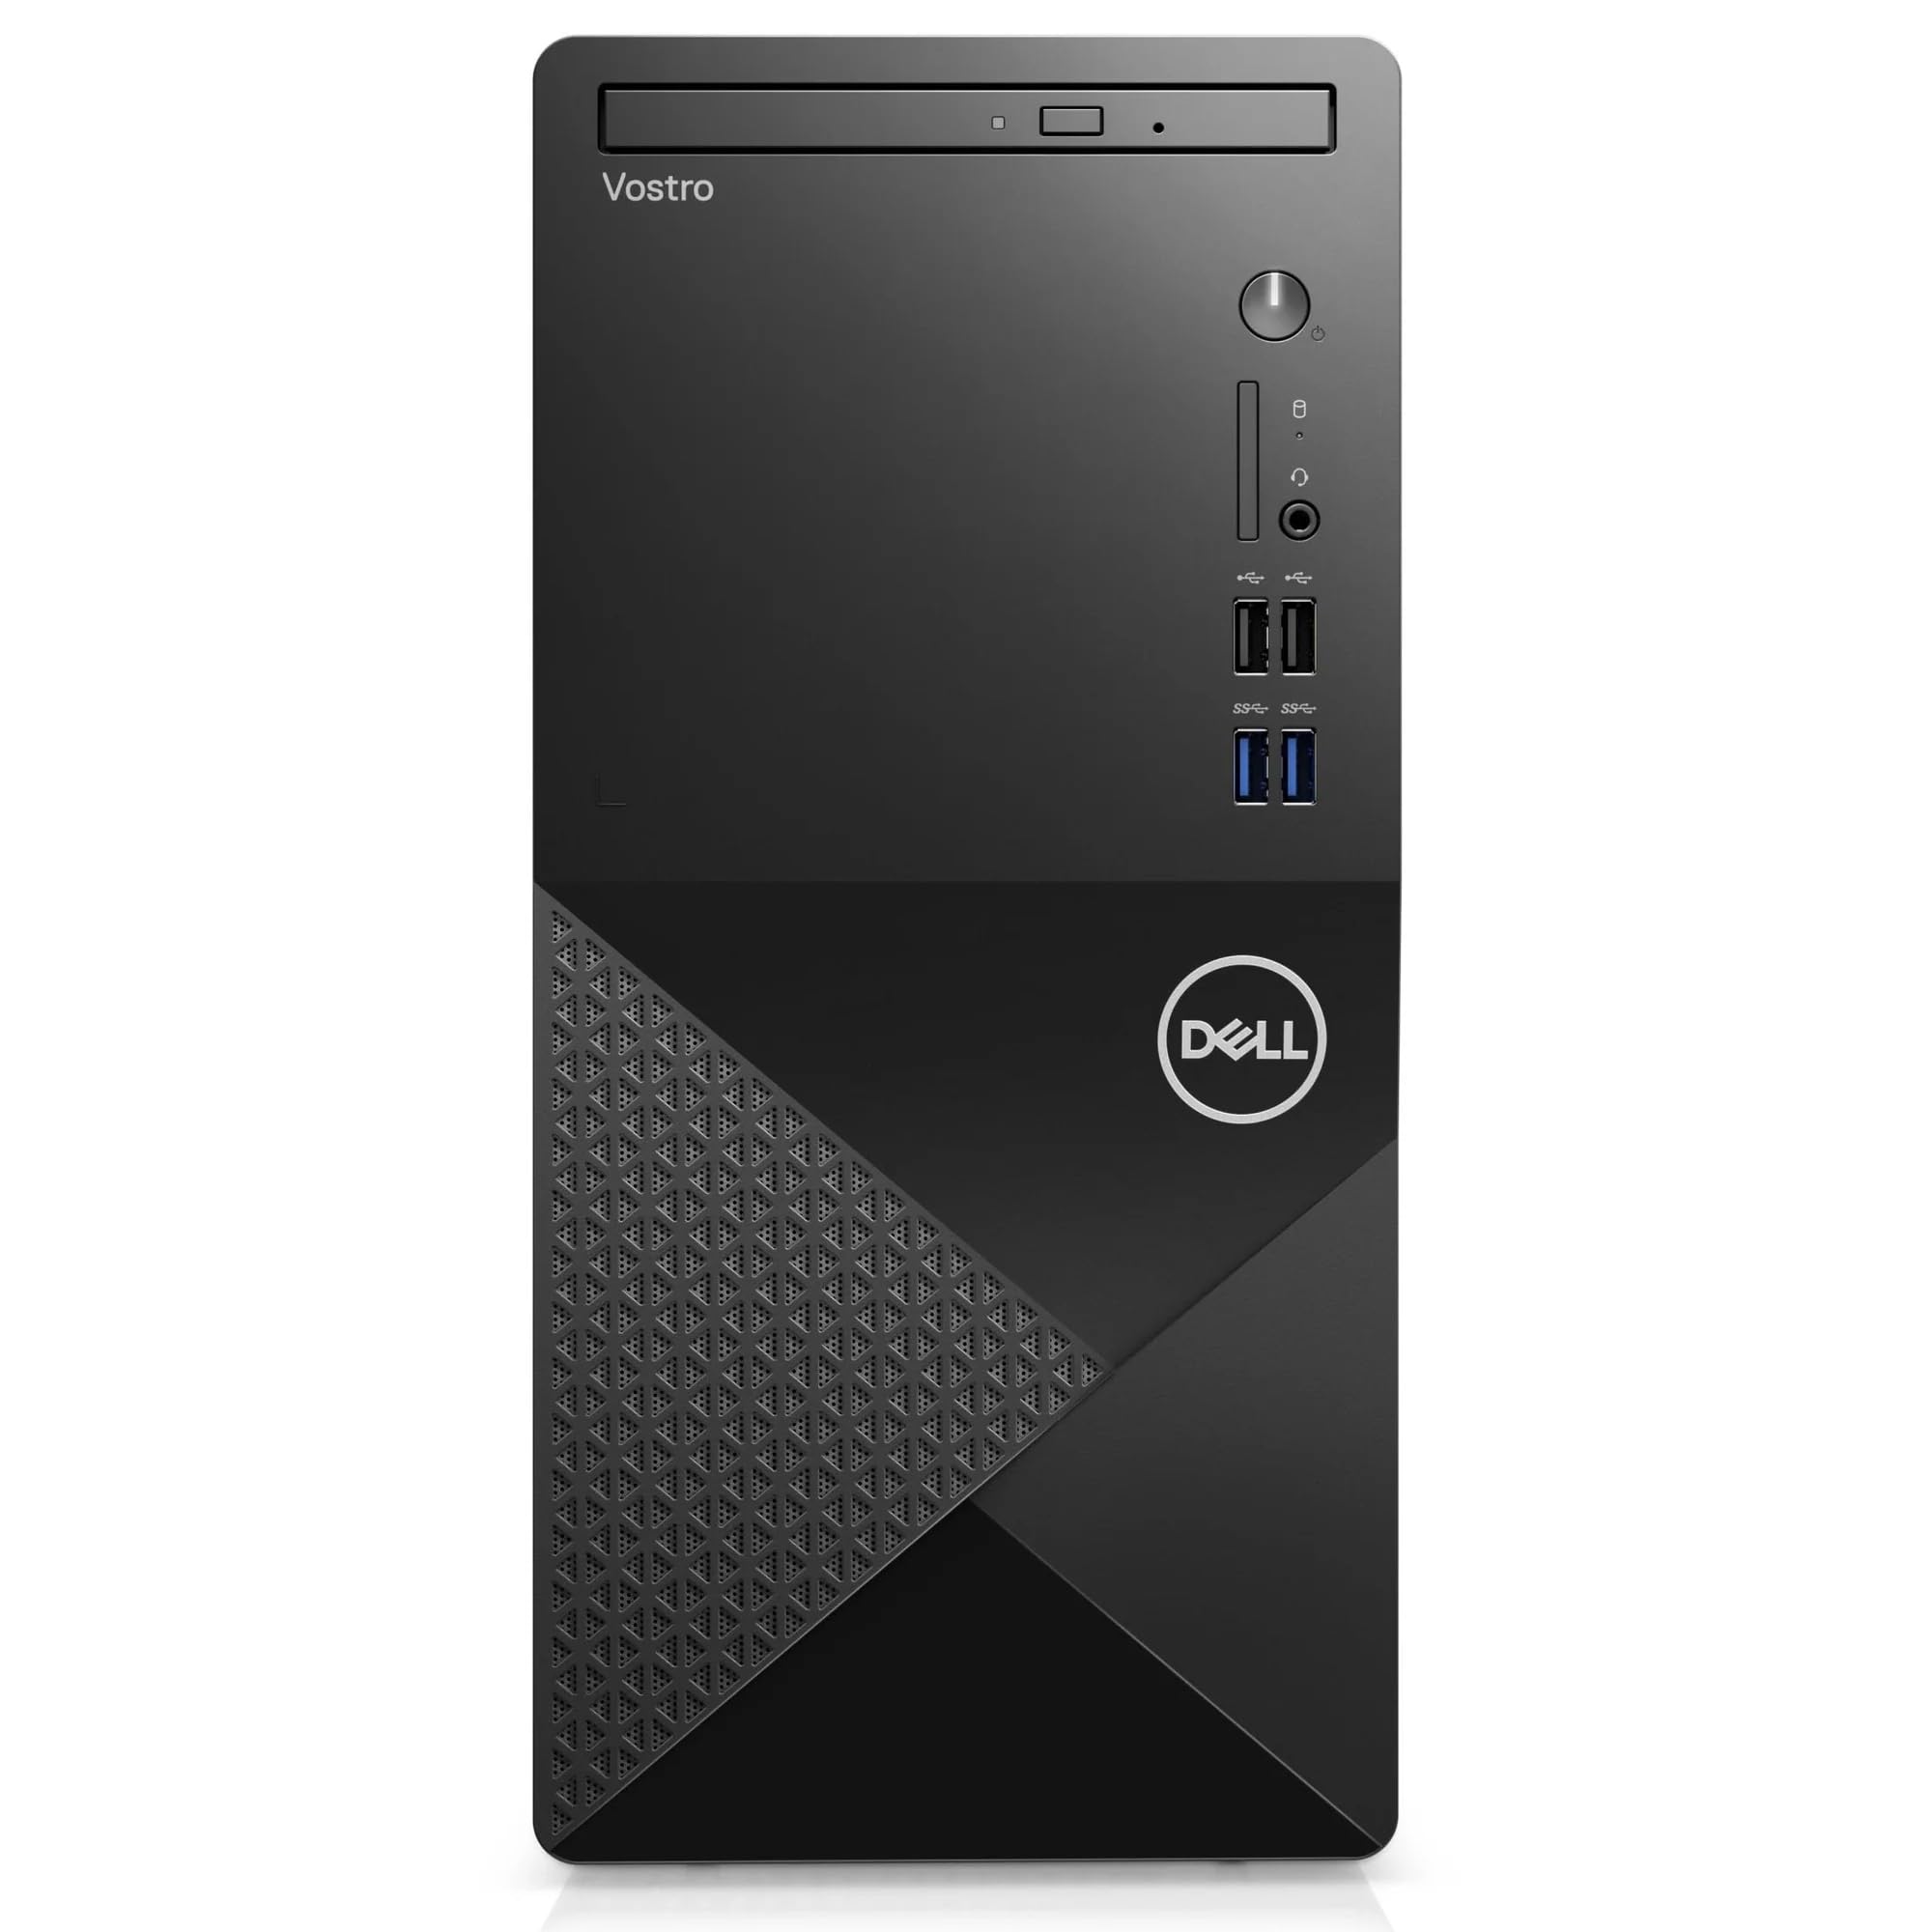 Dell 2023 Vostro 3910 Business Tower Desktop, 12th Gen Intel 12-Core i7-12700 up to 4.9GHz, 32GB DDR4 RAM, 1TB PCIe SSD, DVDRW, 802.11AC WiFi, Bluetooth 5, Keyboard & Mouse, Windows 11 Pro